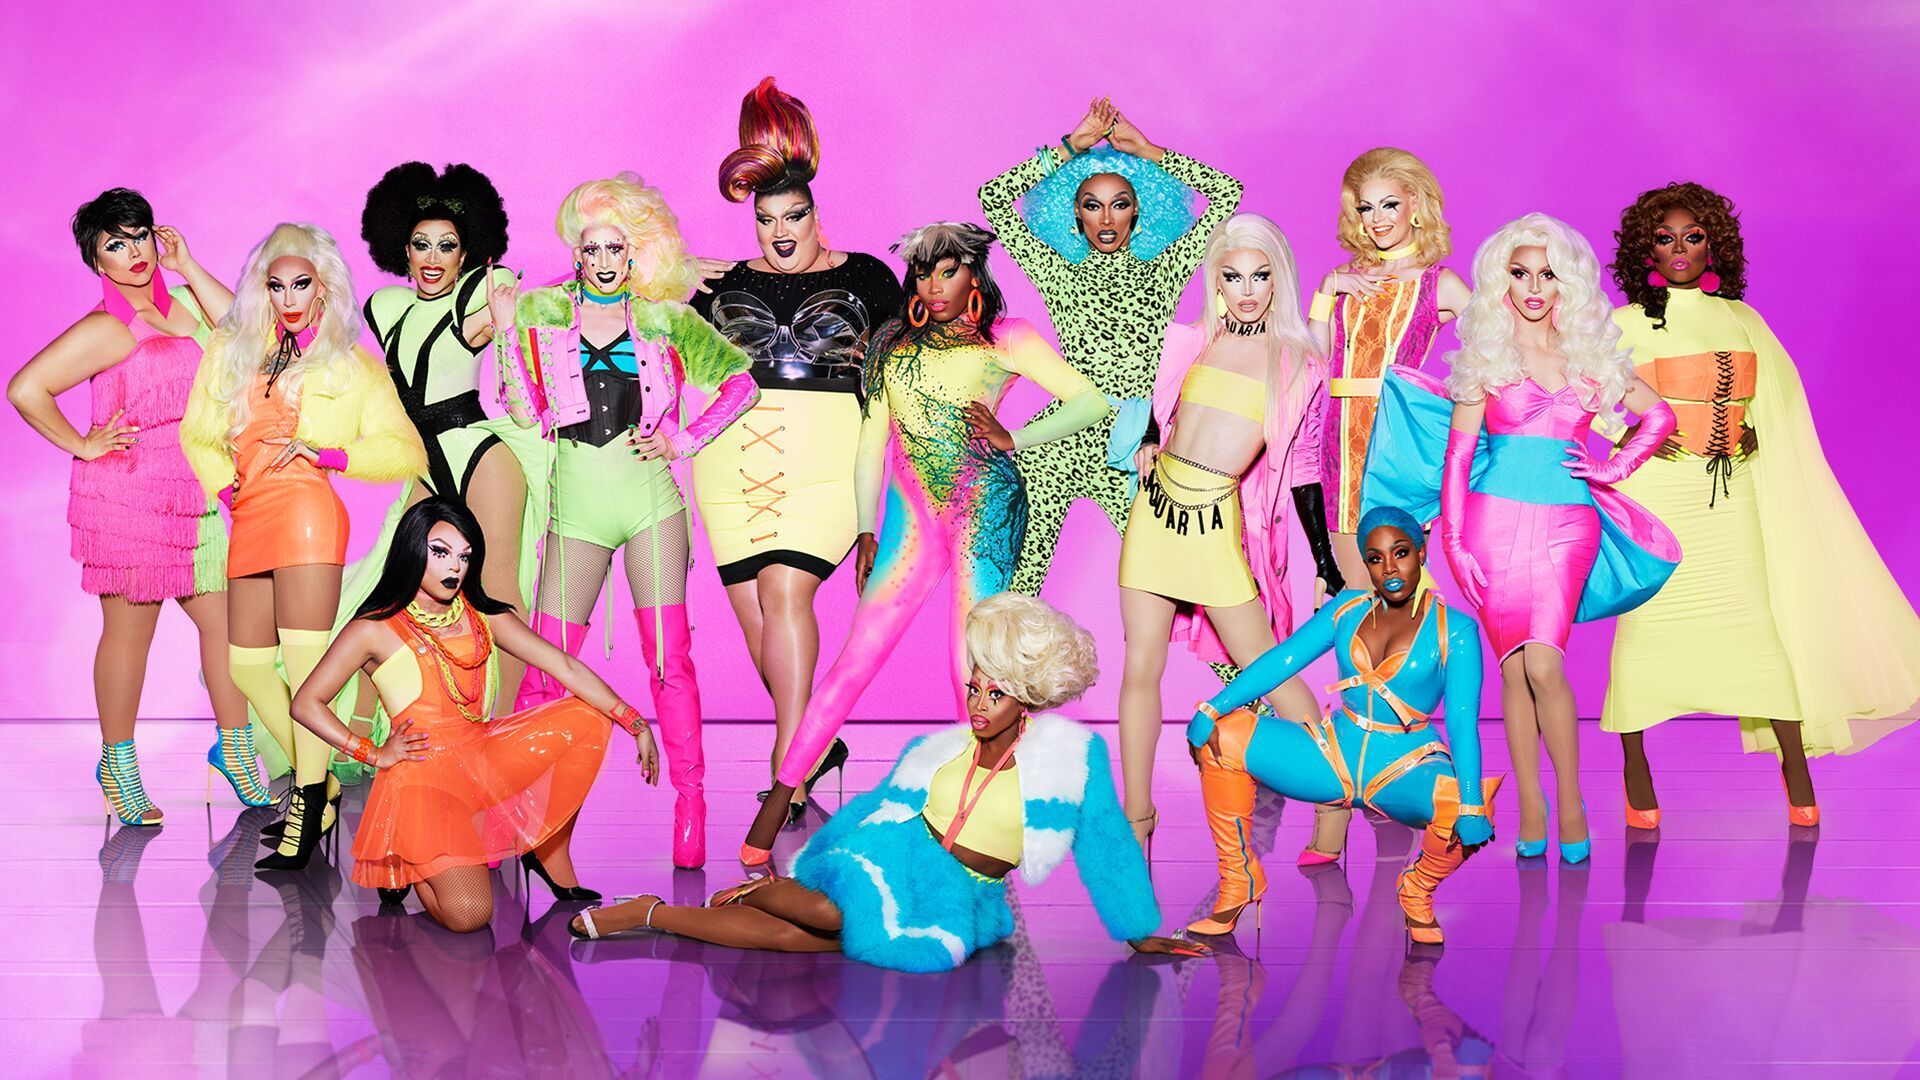 Images for Rupaul S Drag Race Season 14 123movies.